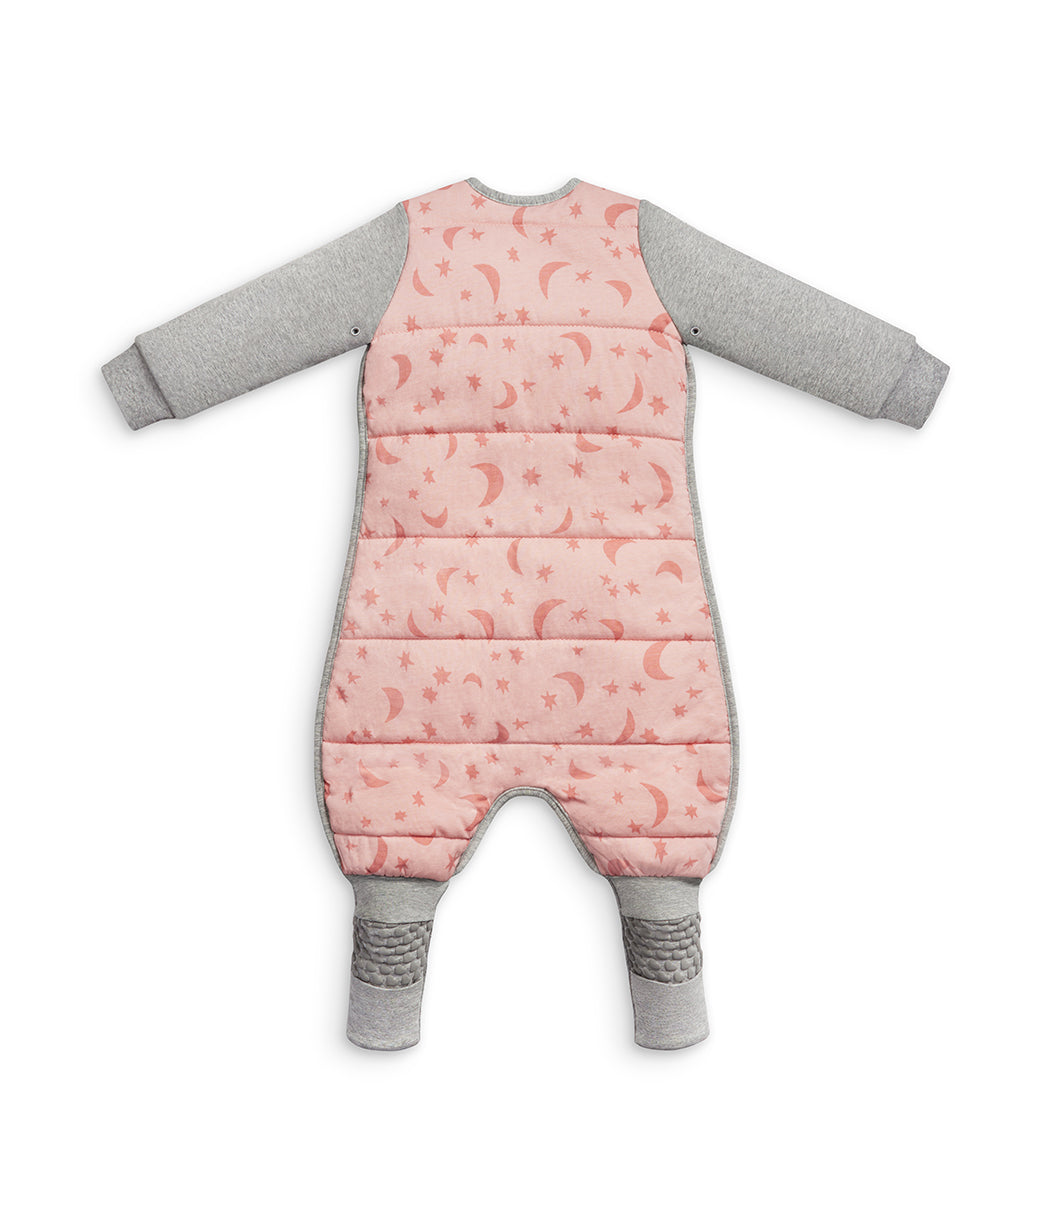 SLEEP SUIT 2.5 TOG WARM MOONLIGHT DUSTY PINK Love To Dream South Africa